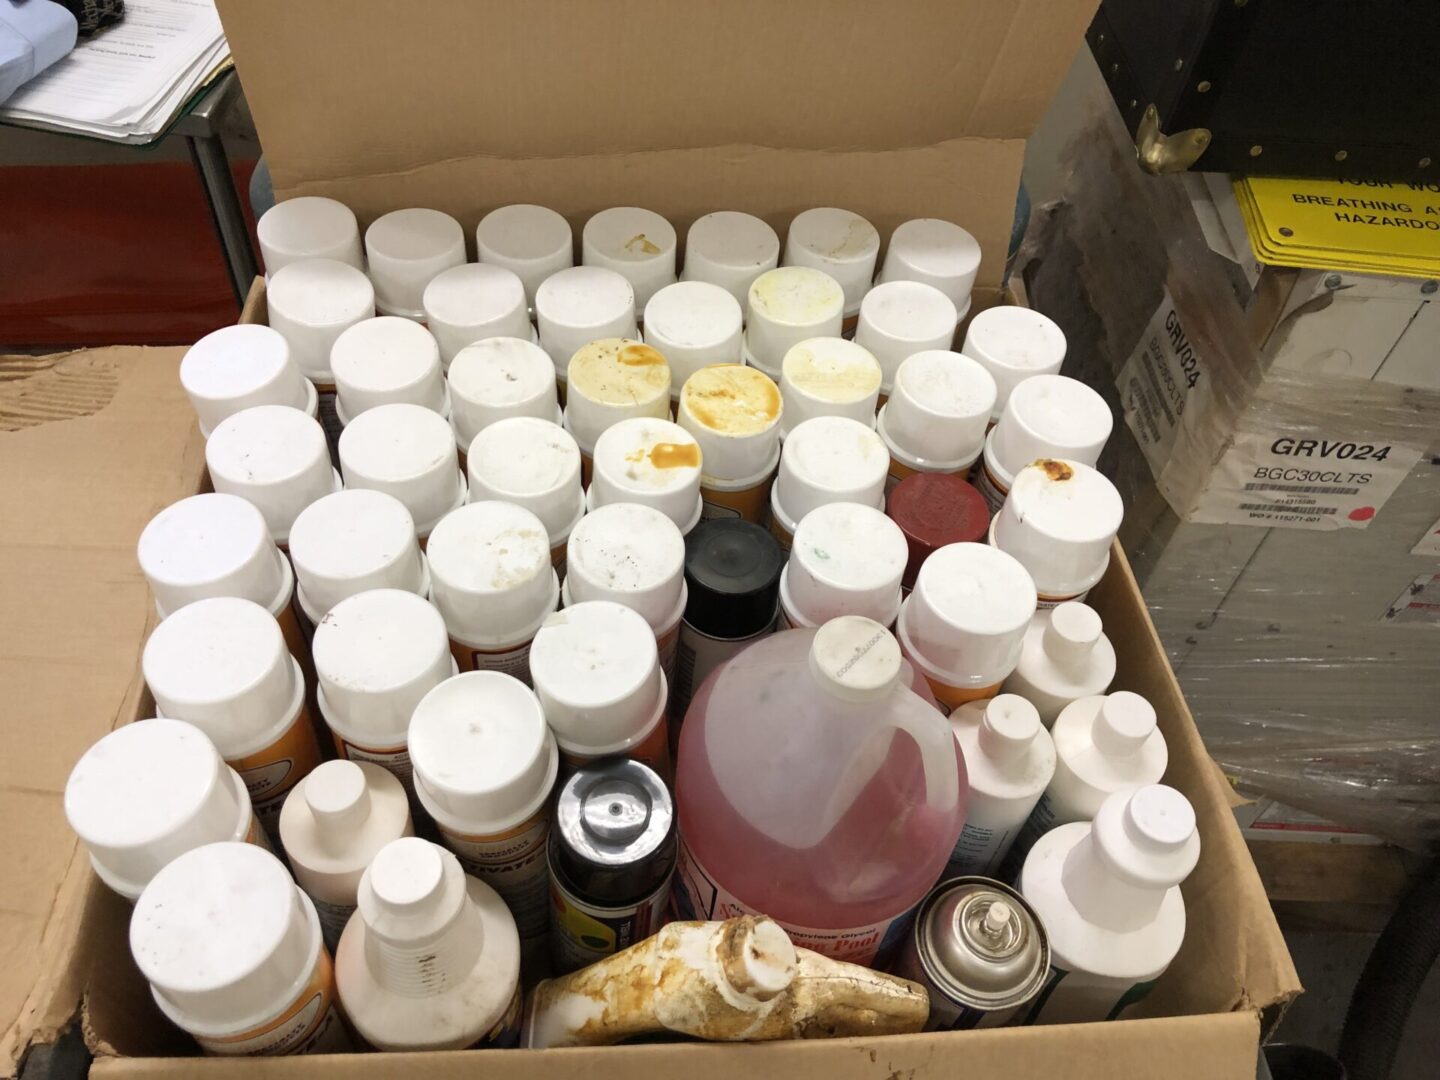 A box filled with a lot of different types of liquids.